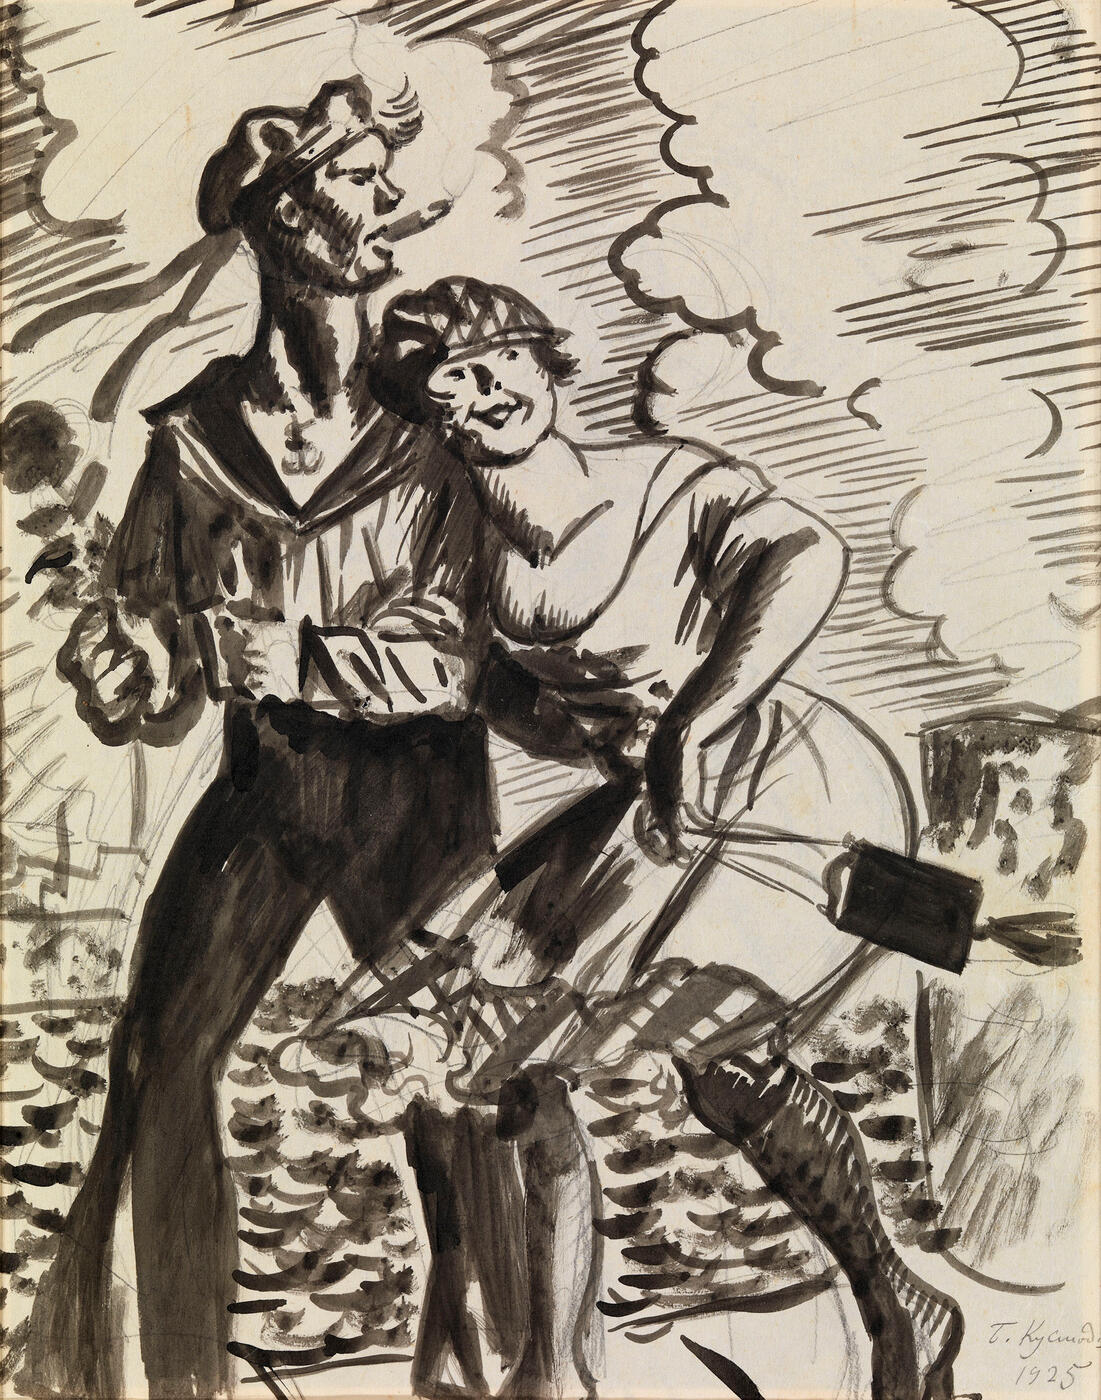 Sailor with His Sweetheart and Sketch for the Aforementioned Composition, from the series "Russian Types", double-sided work